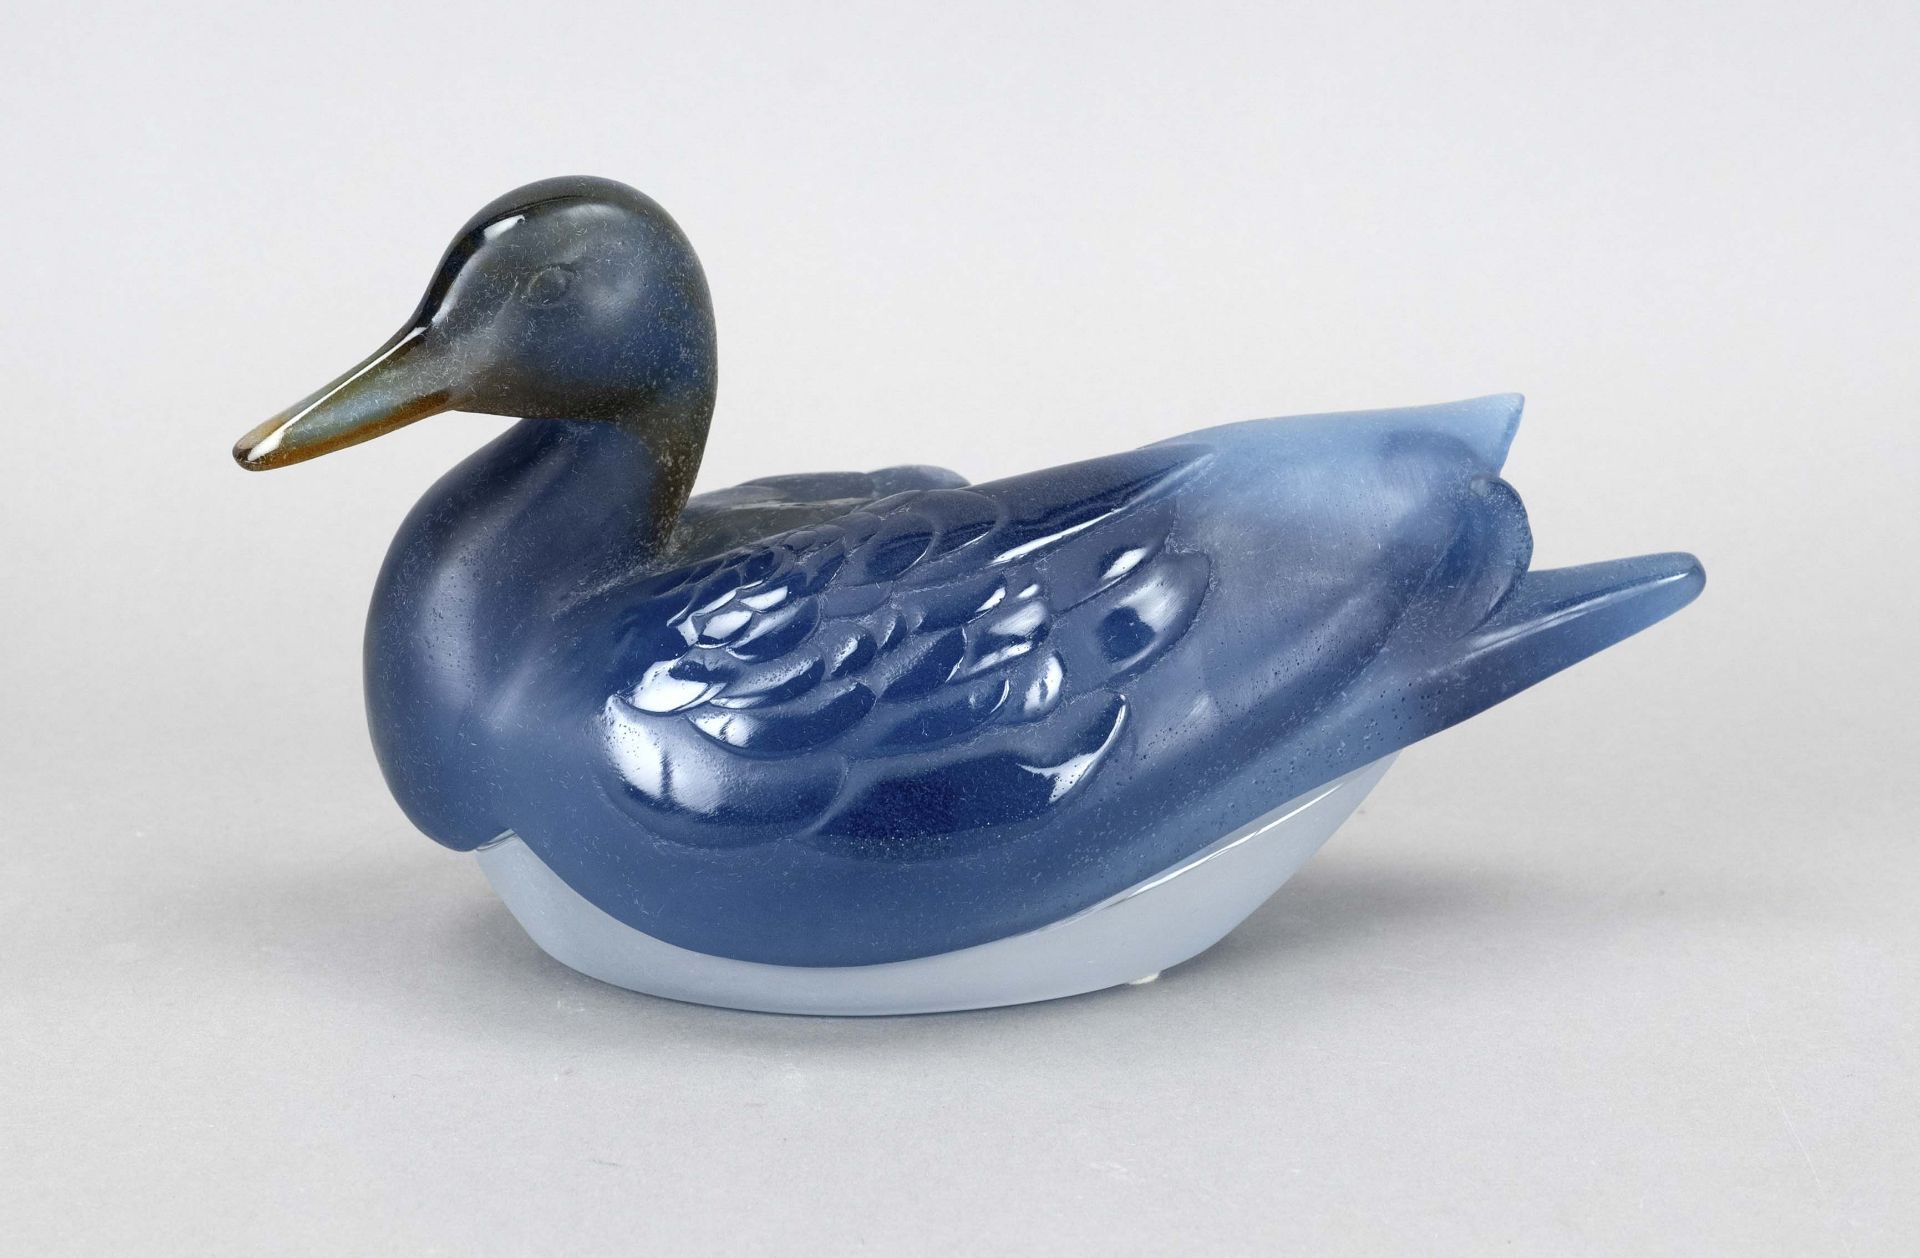 Large figural lidded box, France, 2nd half of 20th c., Daum, Nancy, in the shape of a duck, clear